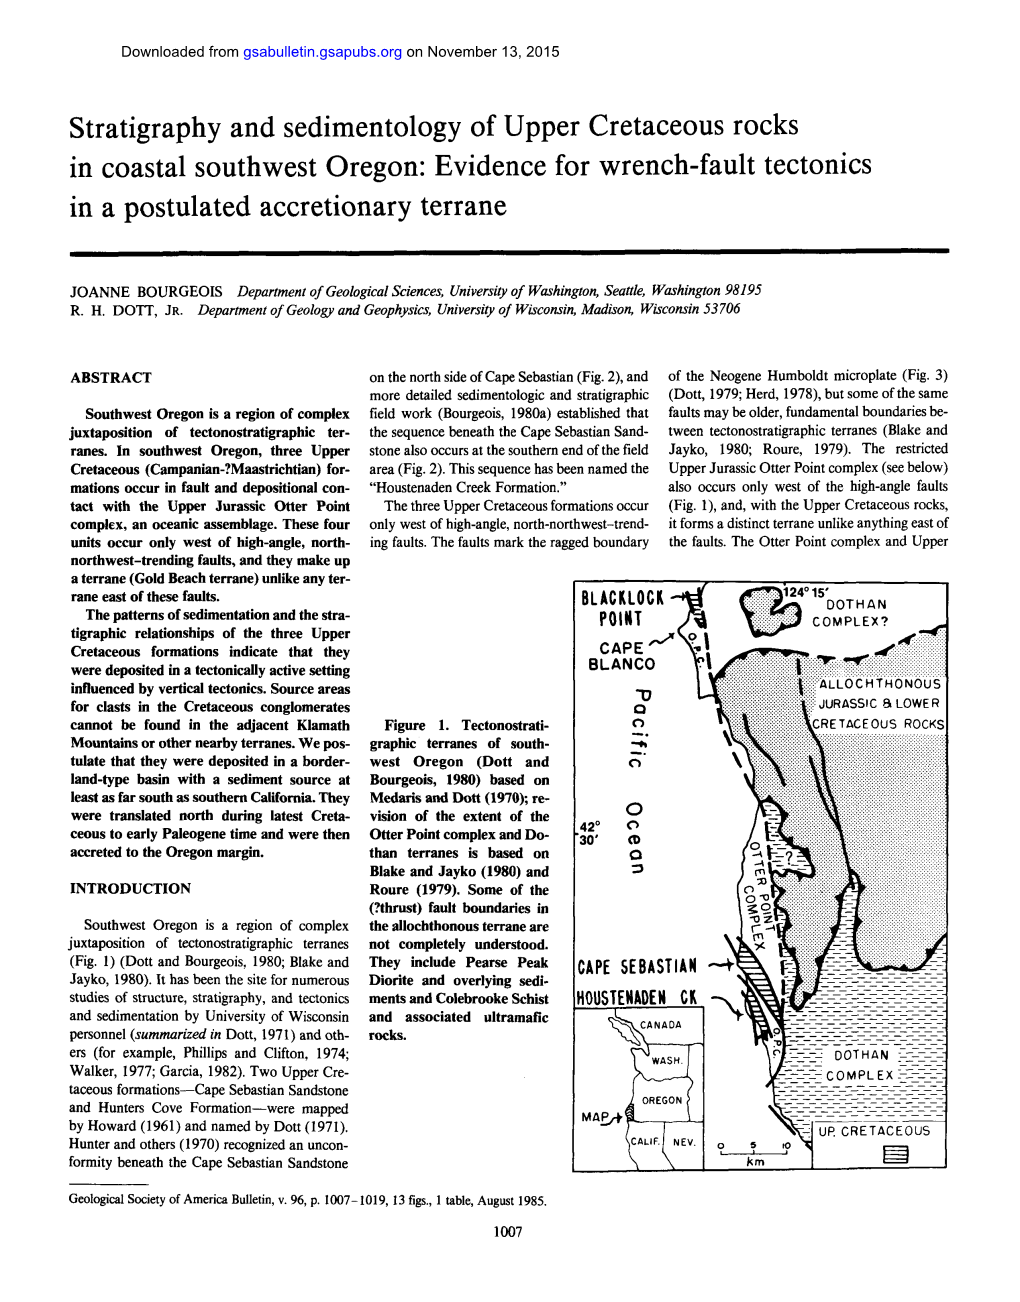 Stratigraphy and Sedimentology of Upper Cretaceous Rocks in Coastal Southwest Oregon: Evidence for Wrench-Fault Tectonics in a Postulated Accretionary Terrane